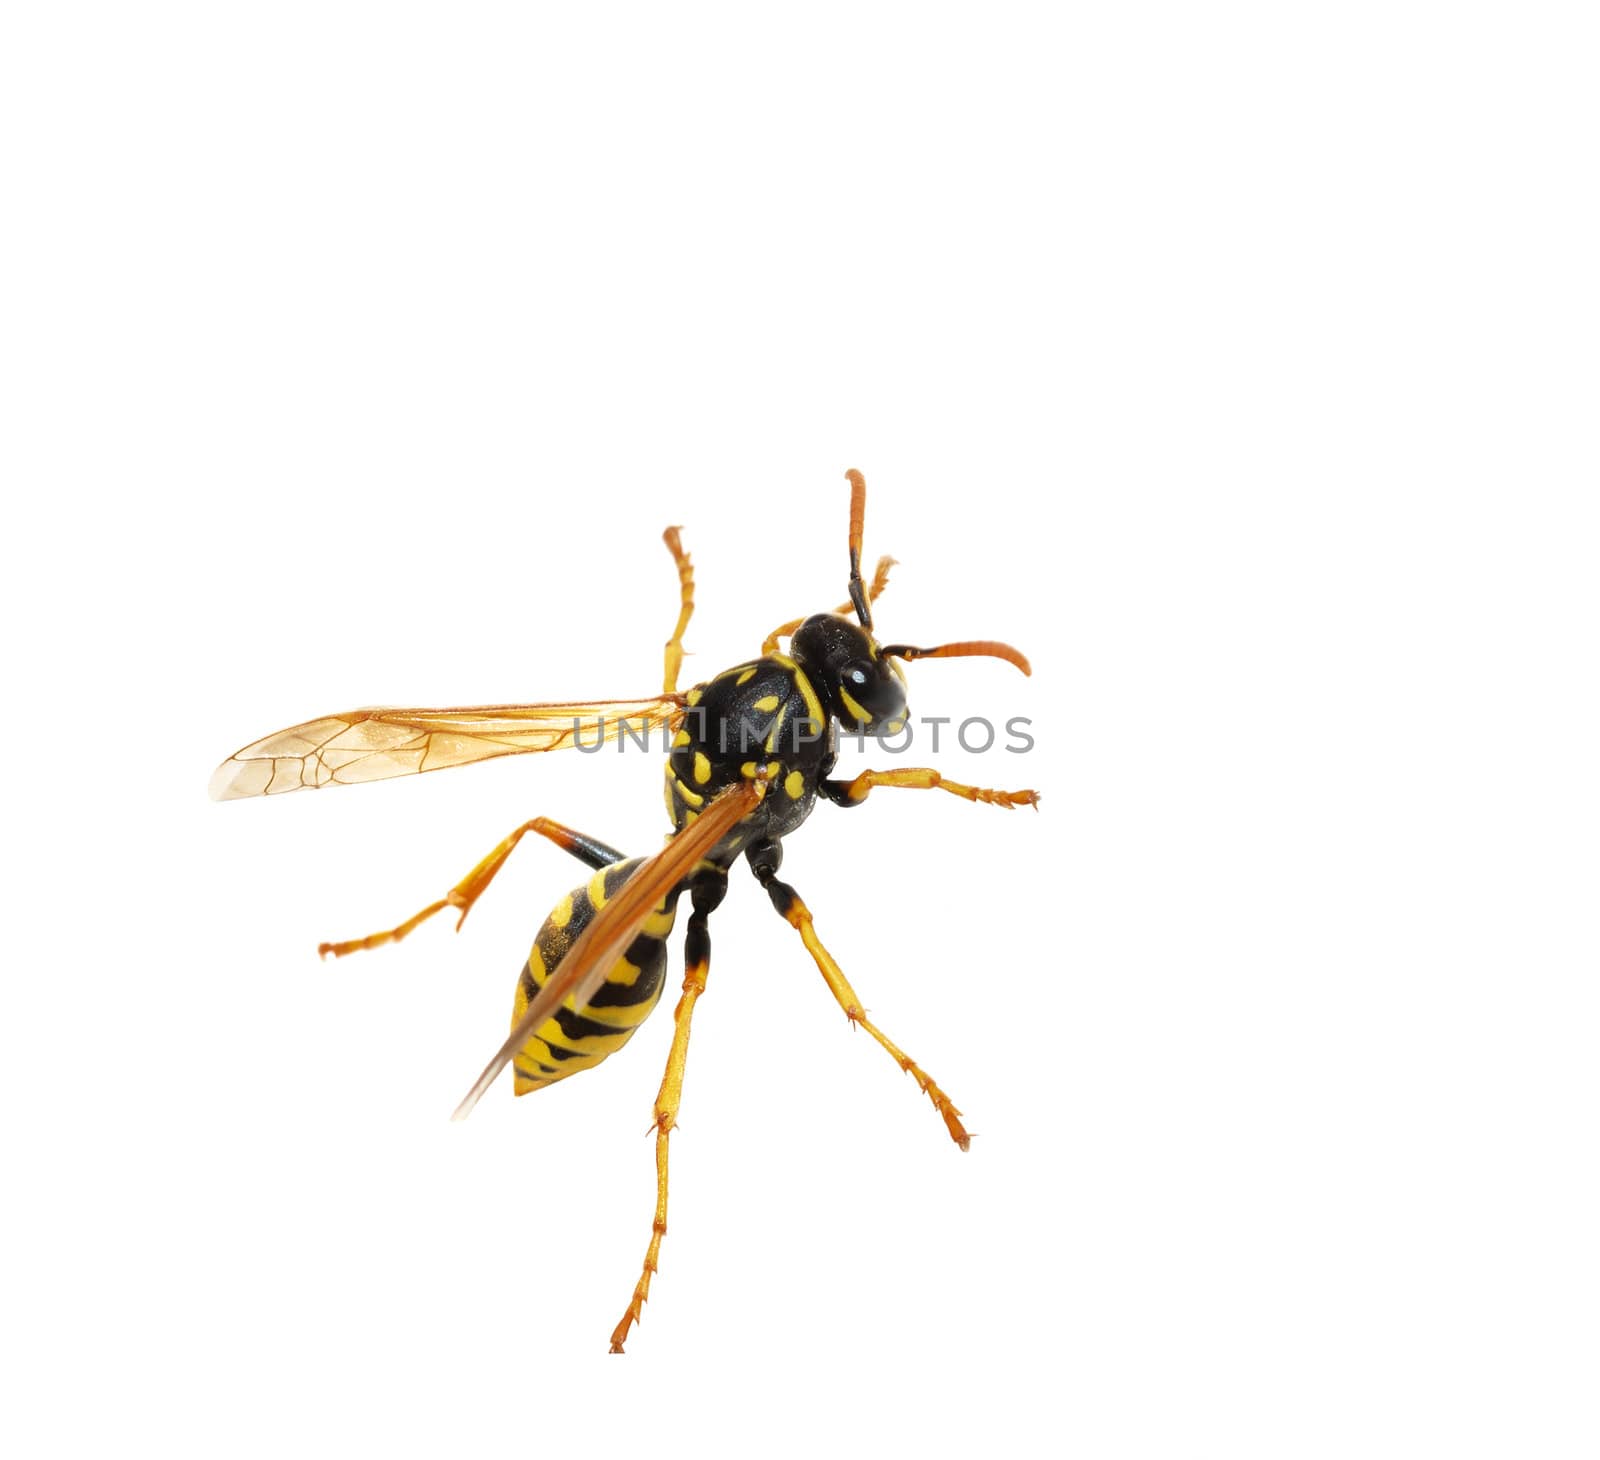 Close-up of a wasp isolated over white background.